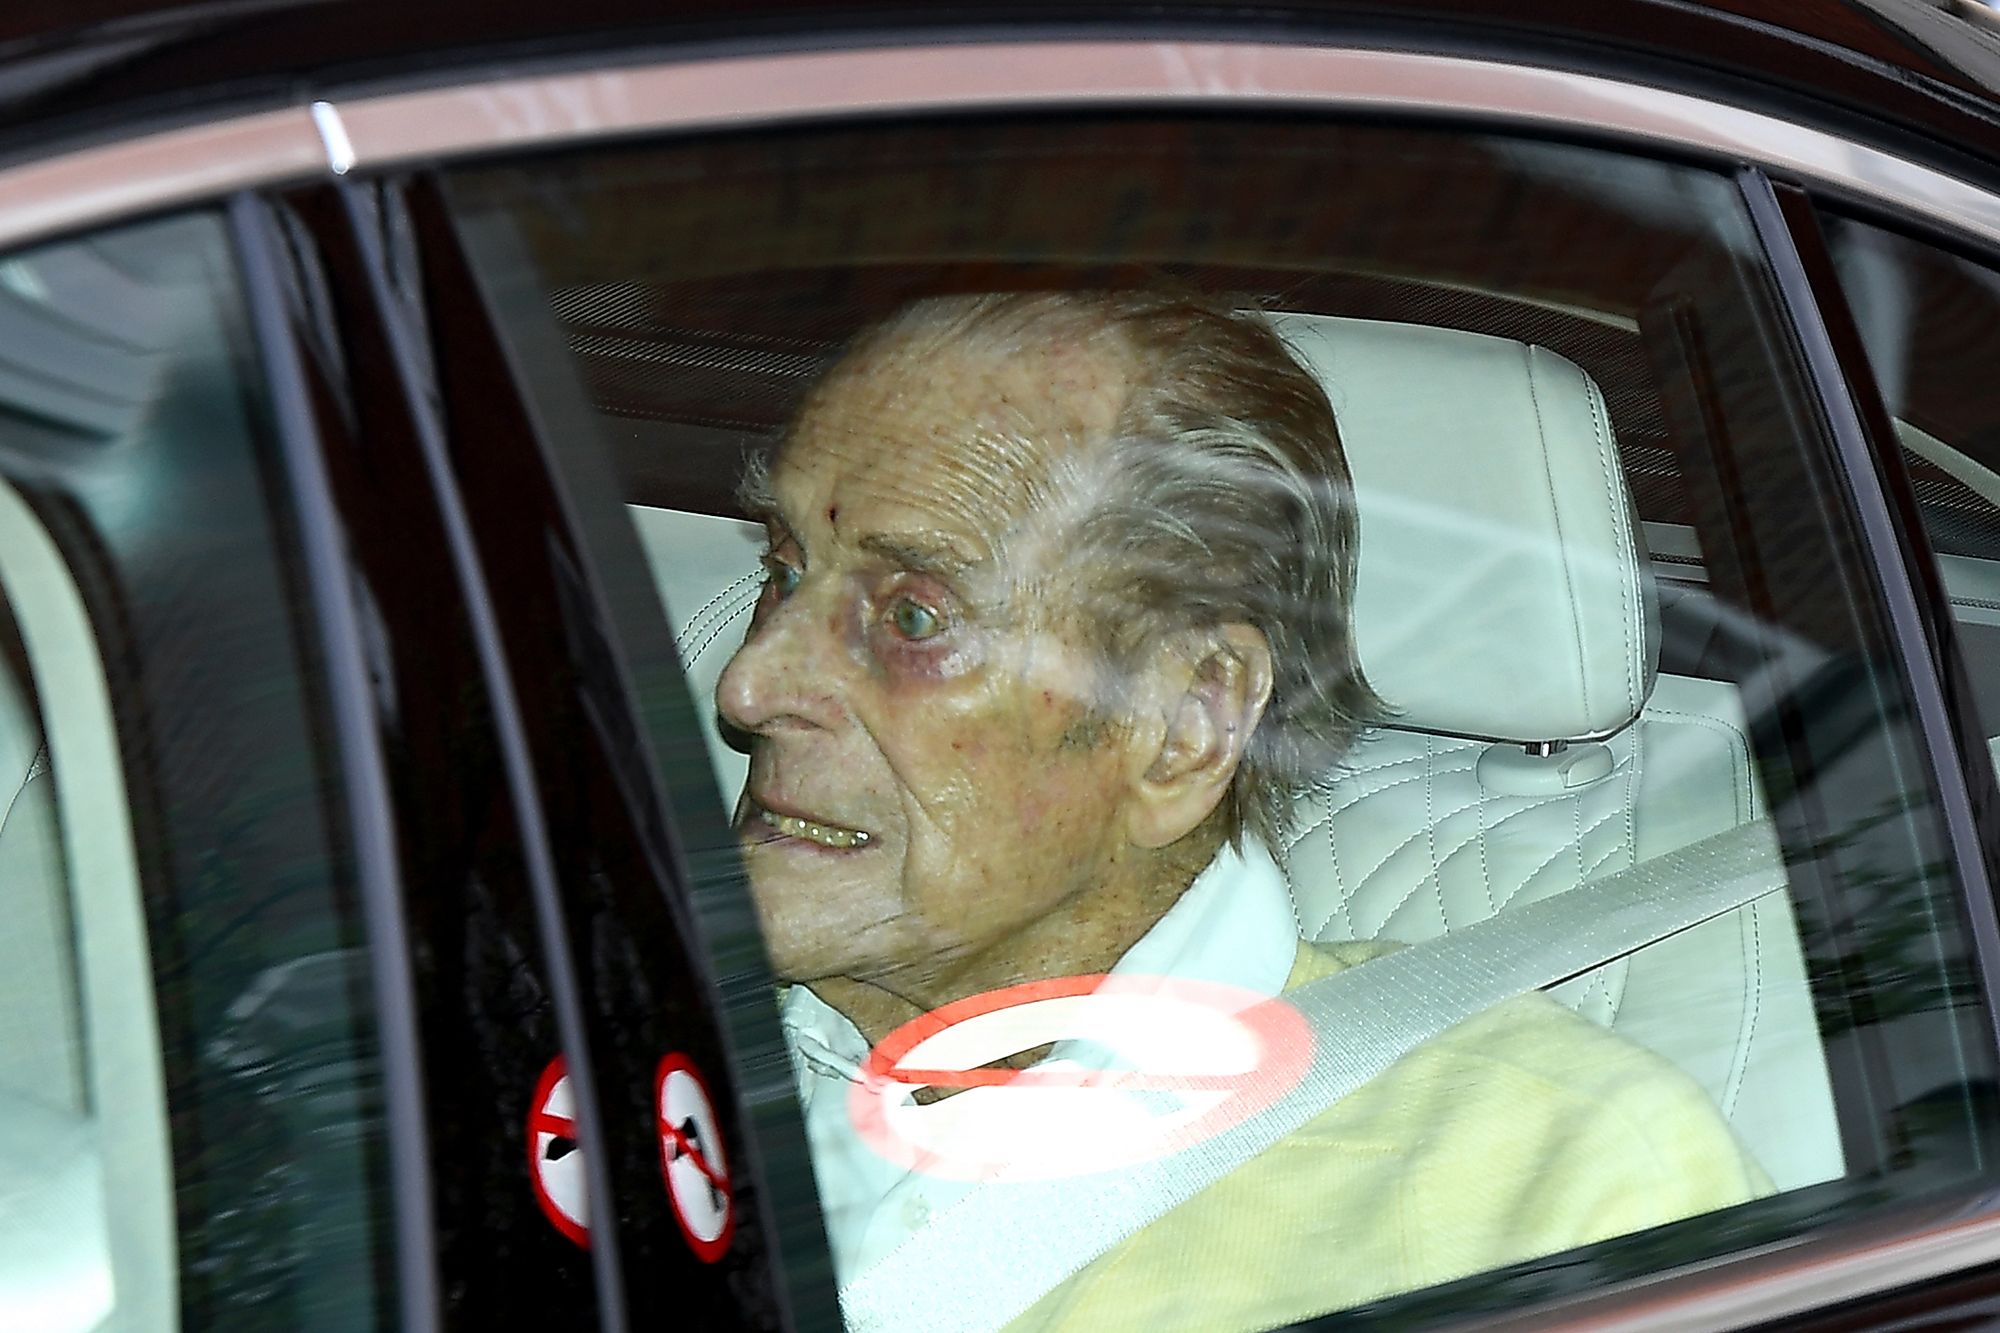 prince philip, march 16, 2021 — photo by jeff spicer getty images